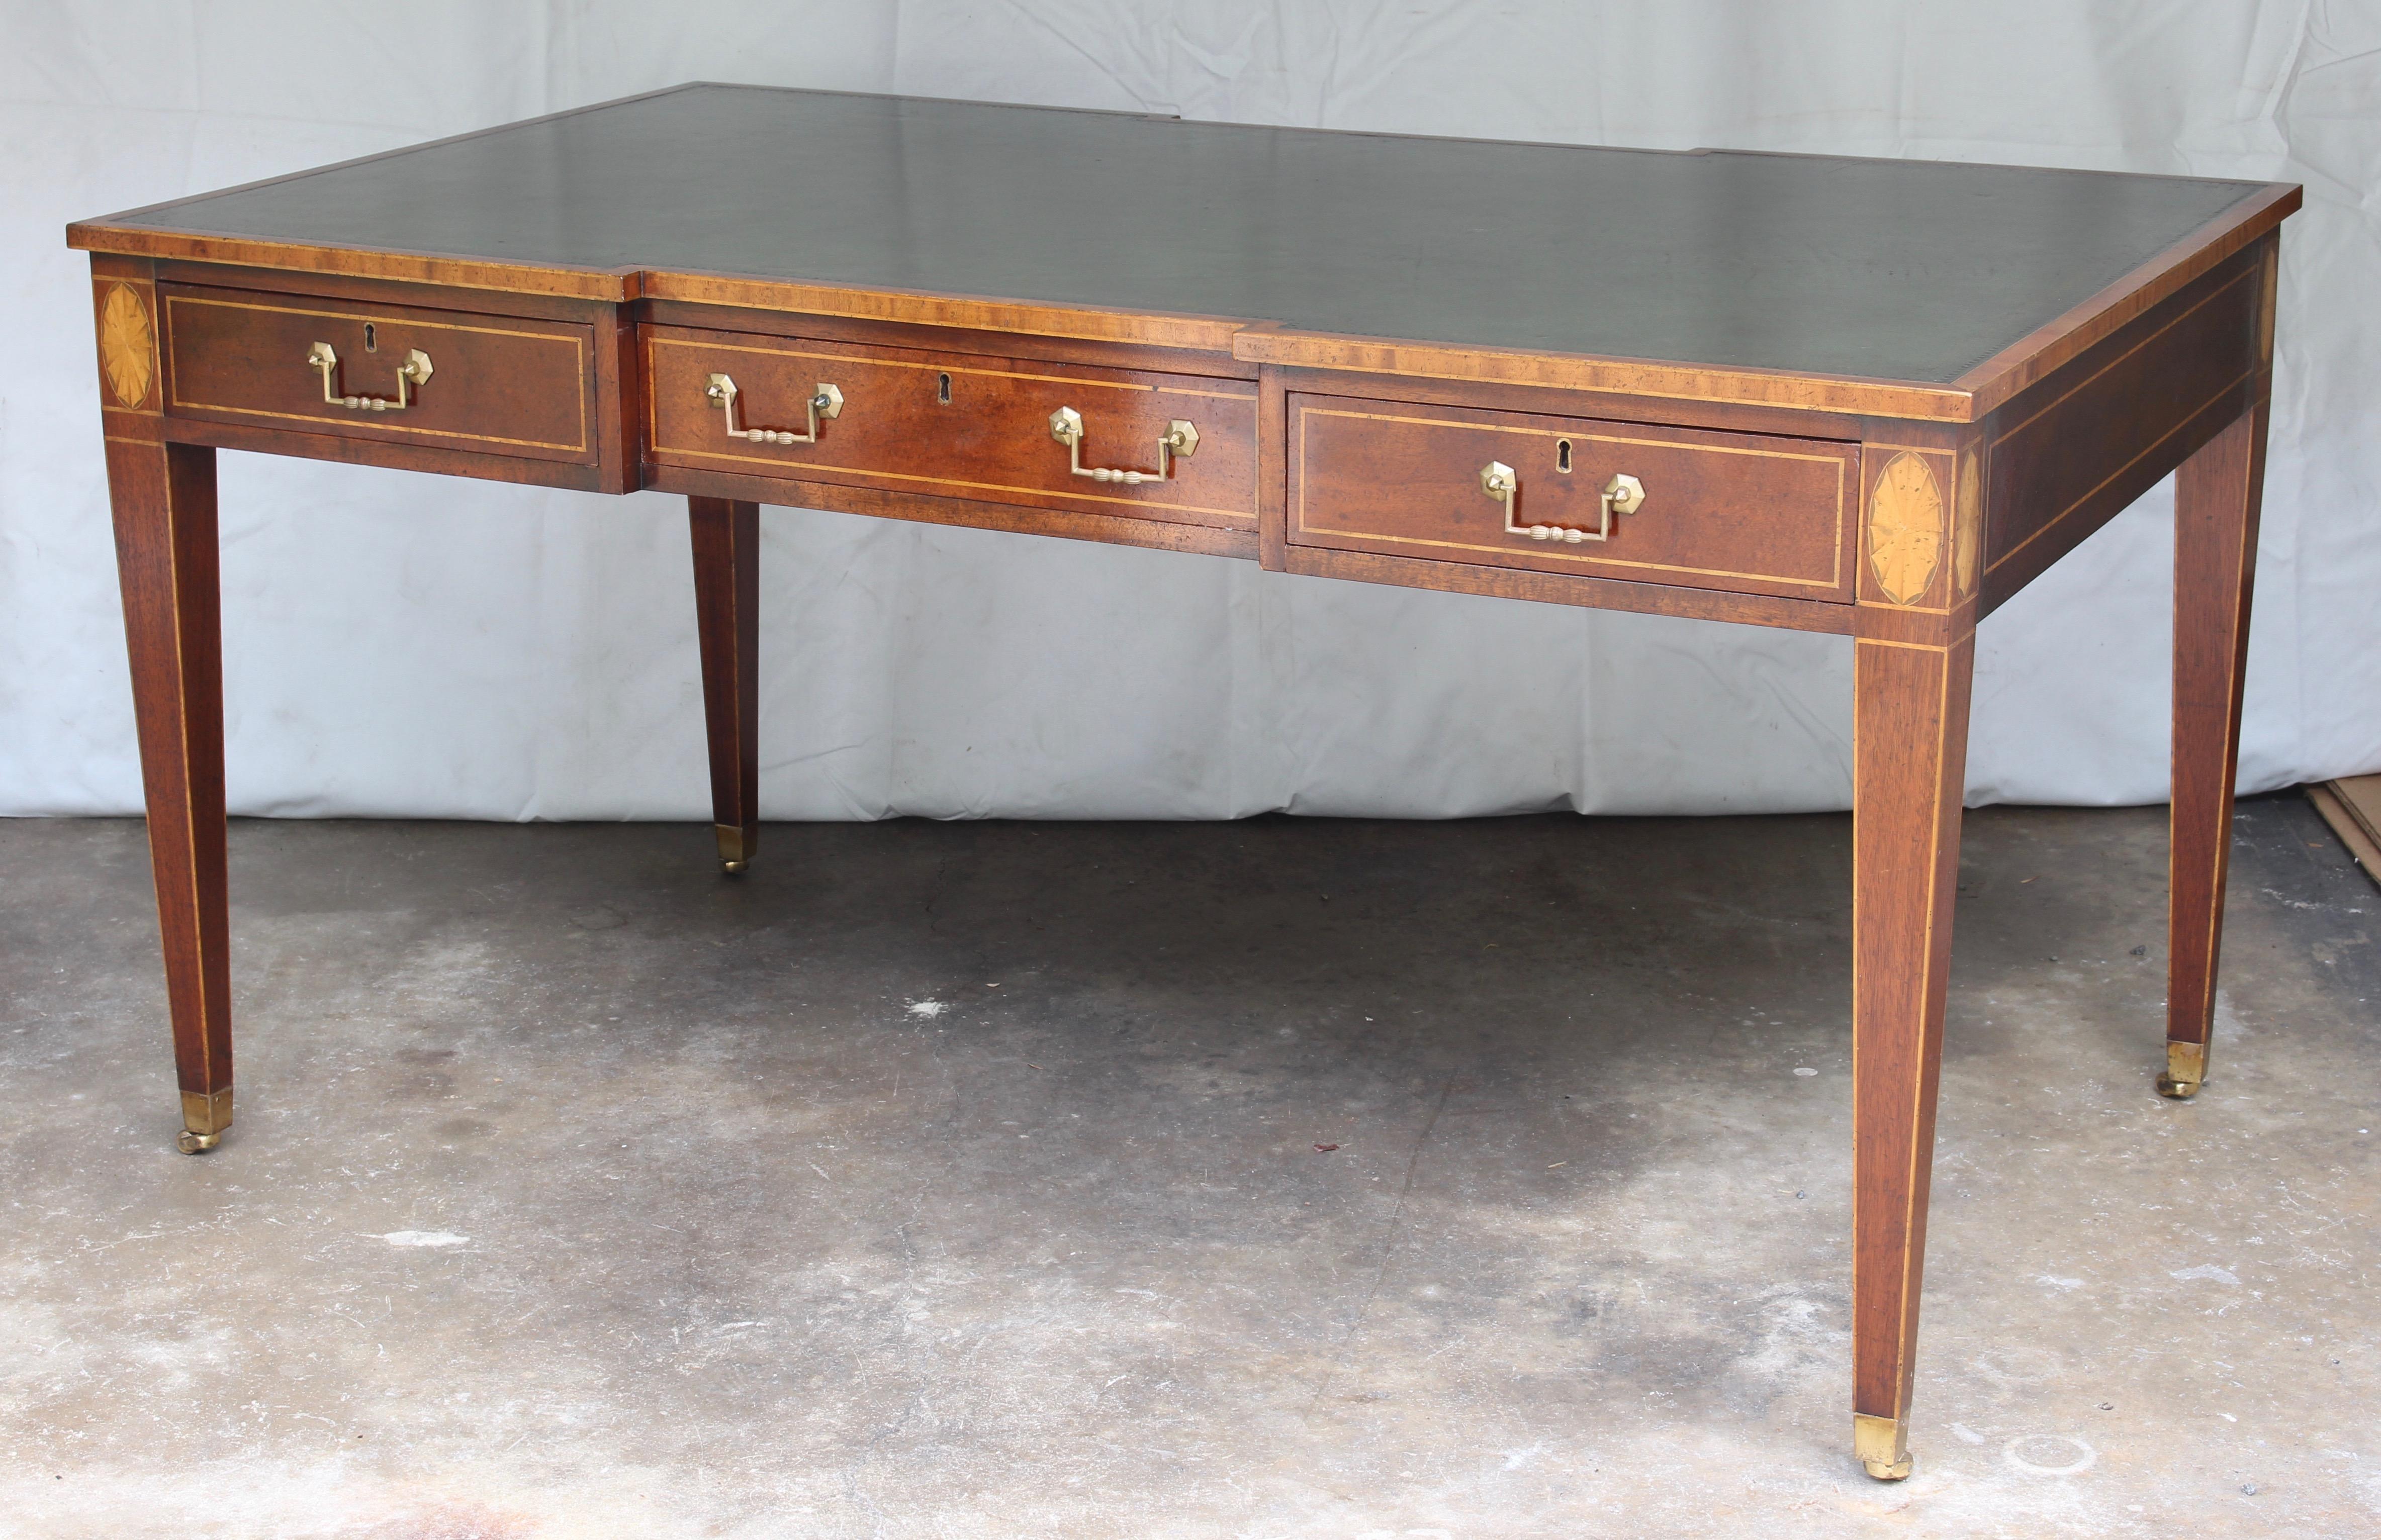 An exceptionally fine late 20th century mahogany Regency style leather topped writing table or desk by Holland & Co. with three drawers on both sides resting on square tapering legs terminating in brass casters.